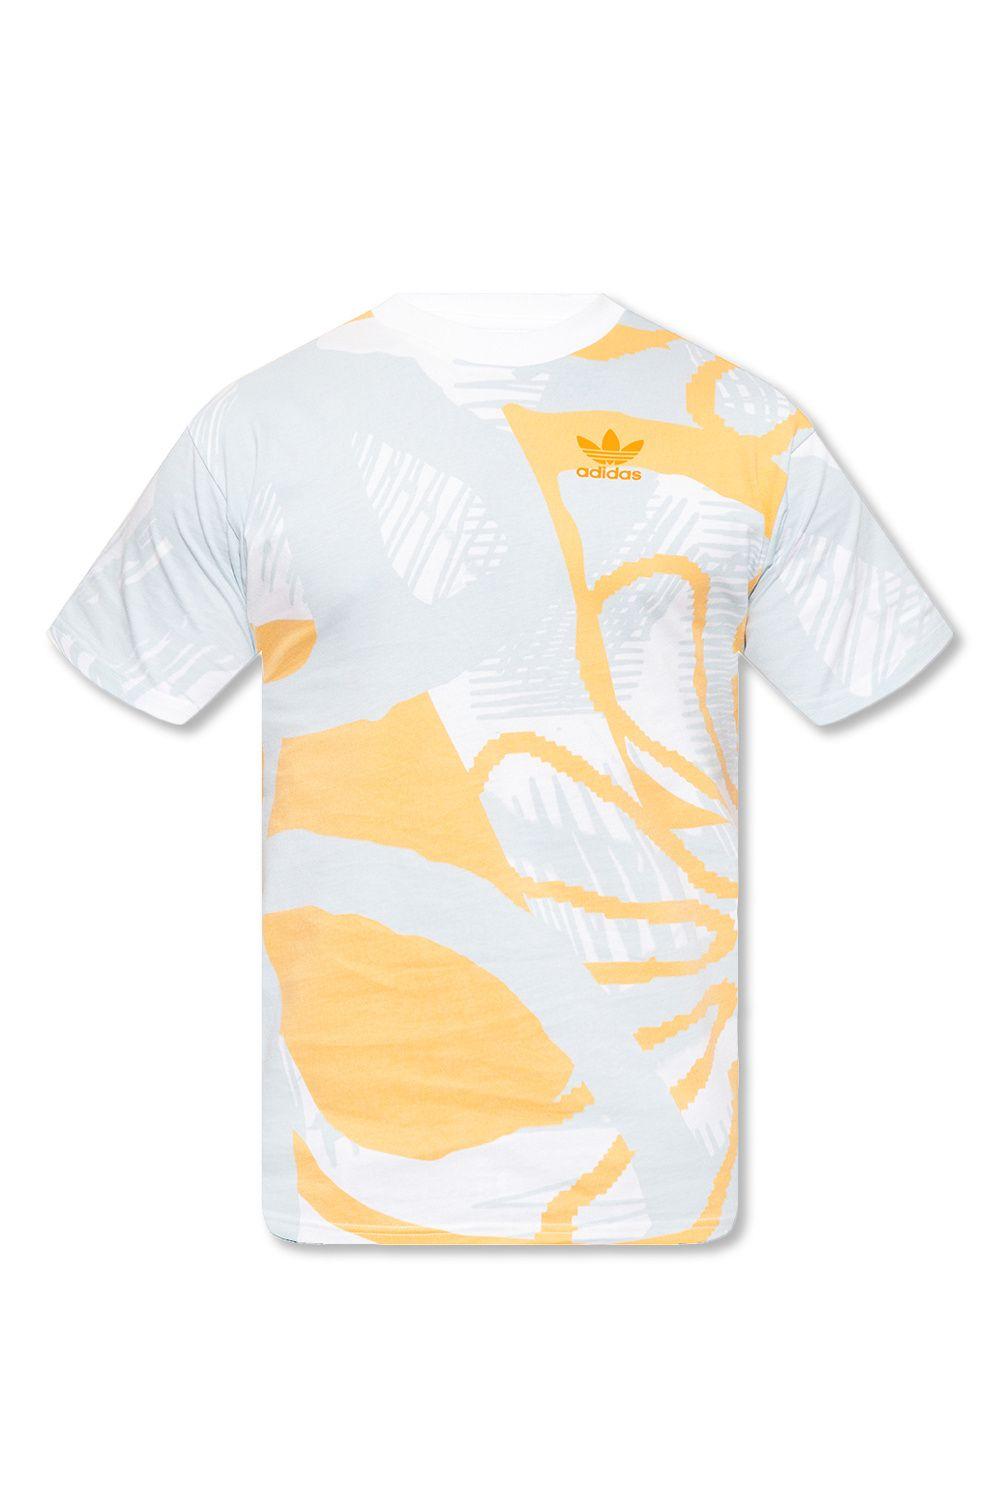 adidas Originals Patterned T-shirt With Logo, for Men | Lyst